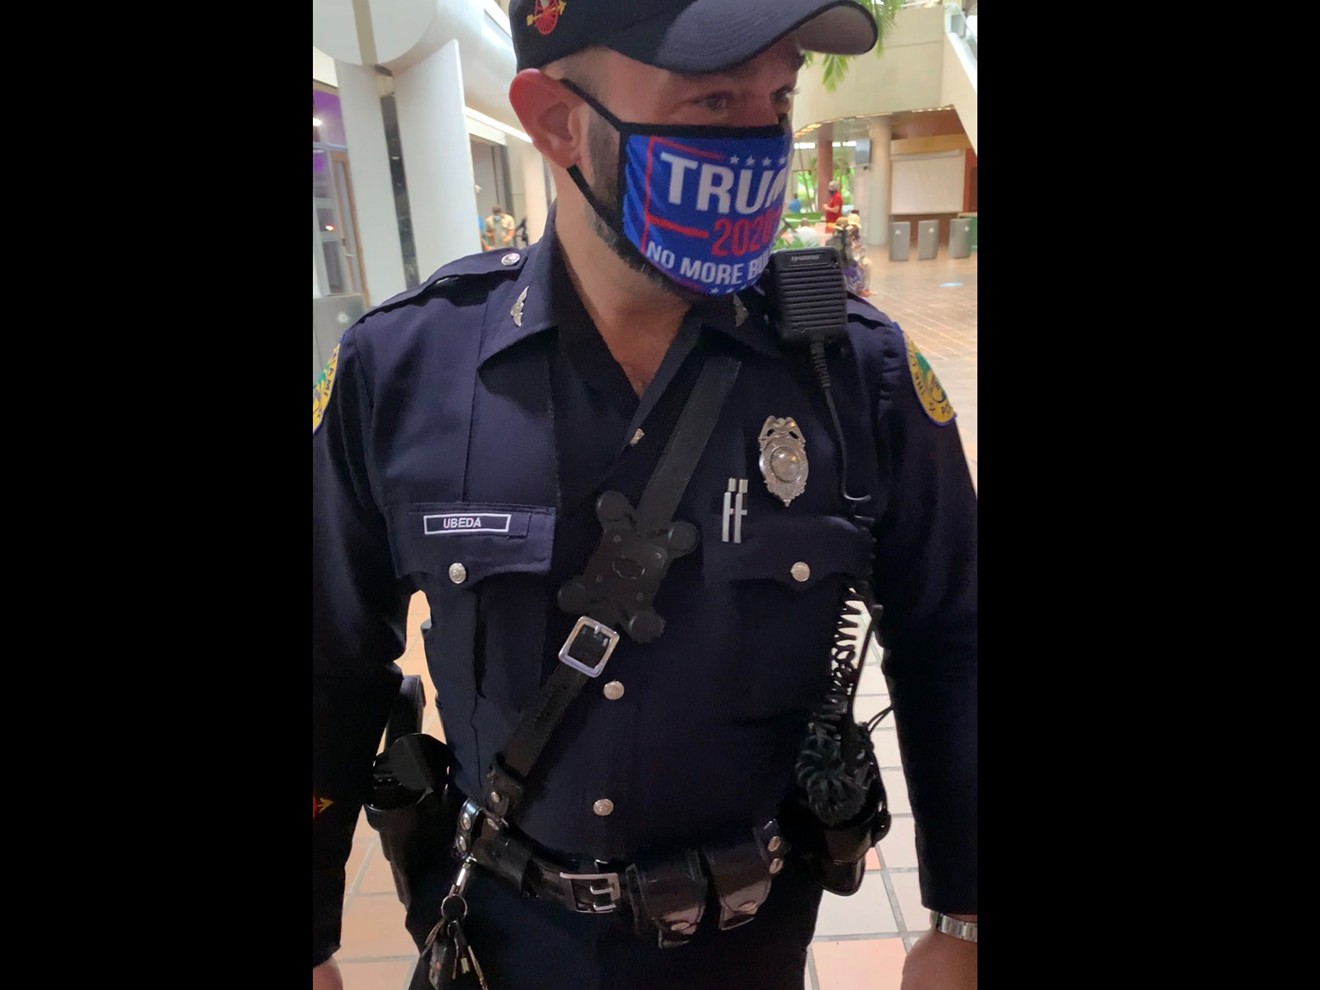 A Miami police officer was photographed in a polling place wearing a Trump 2020 mask.